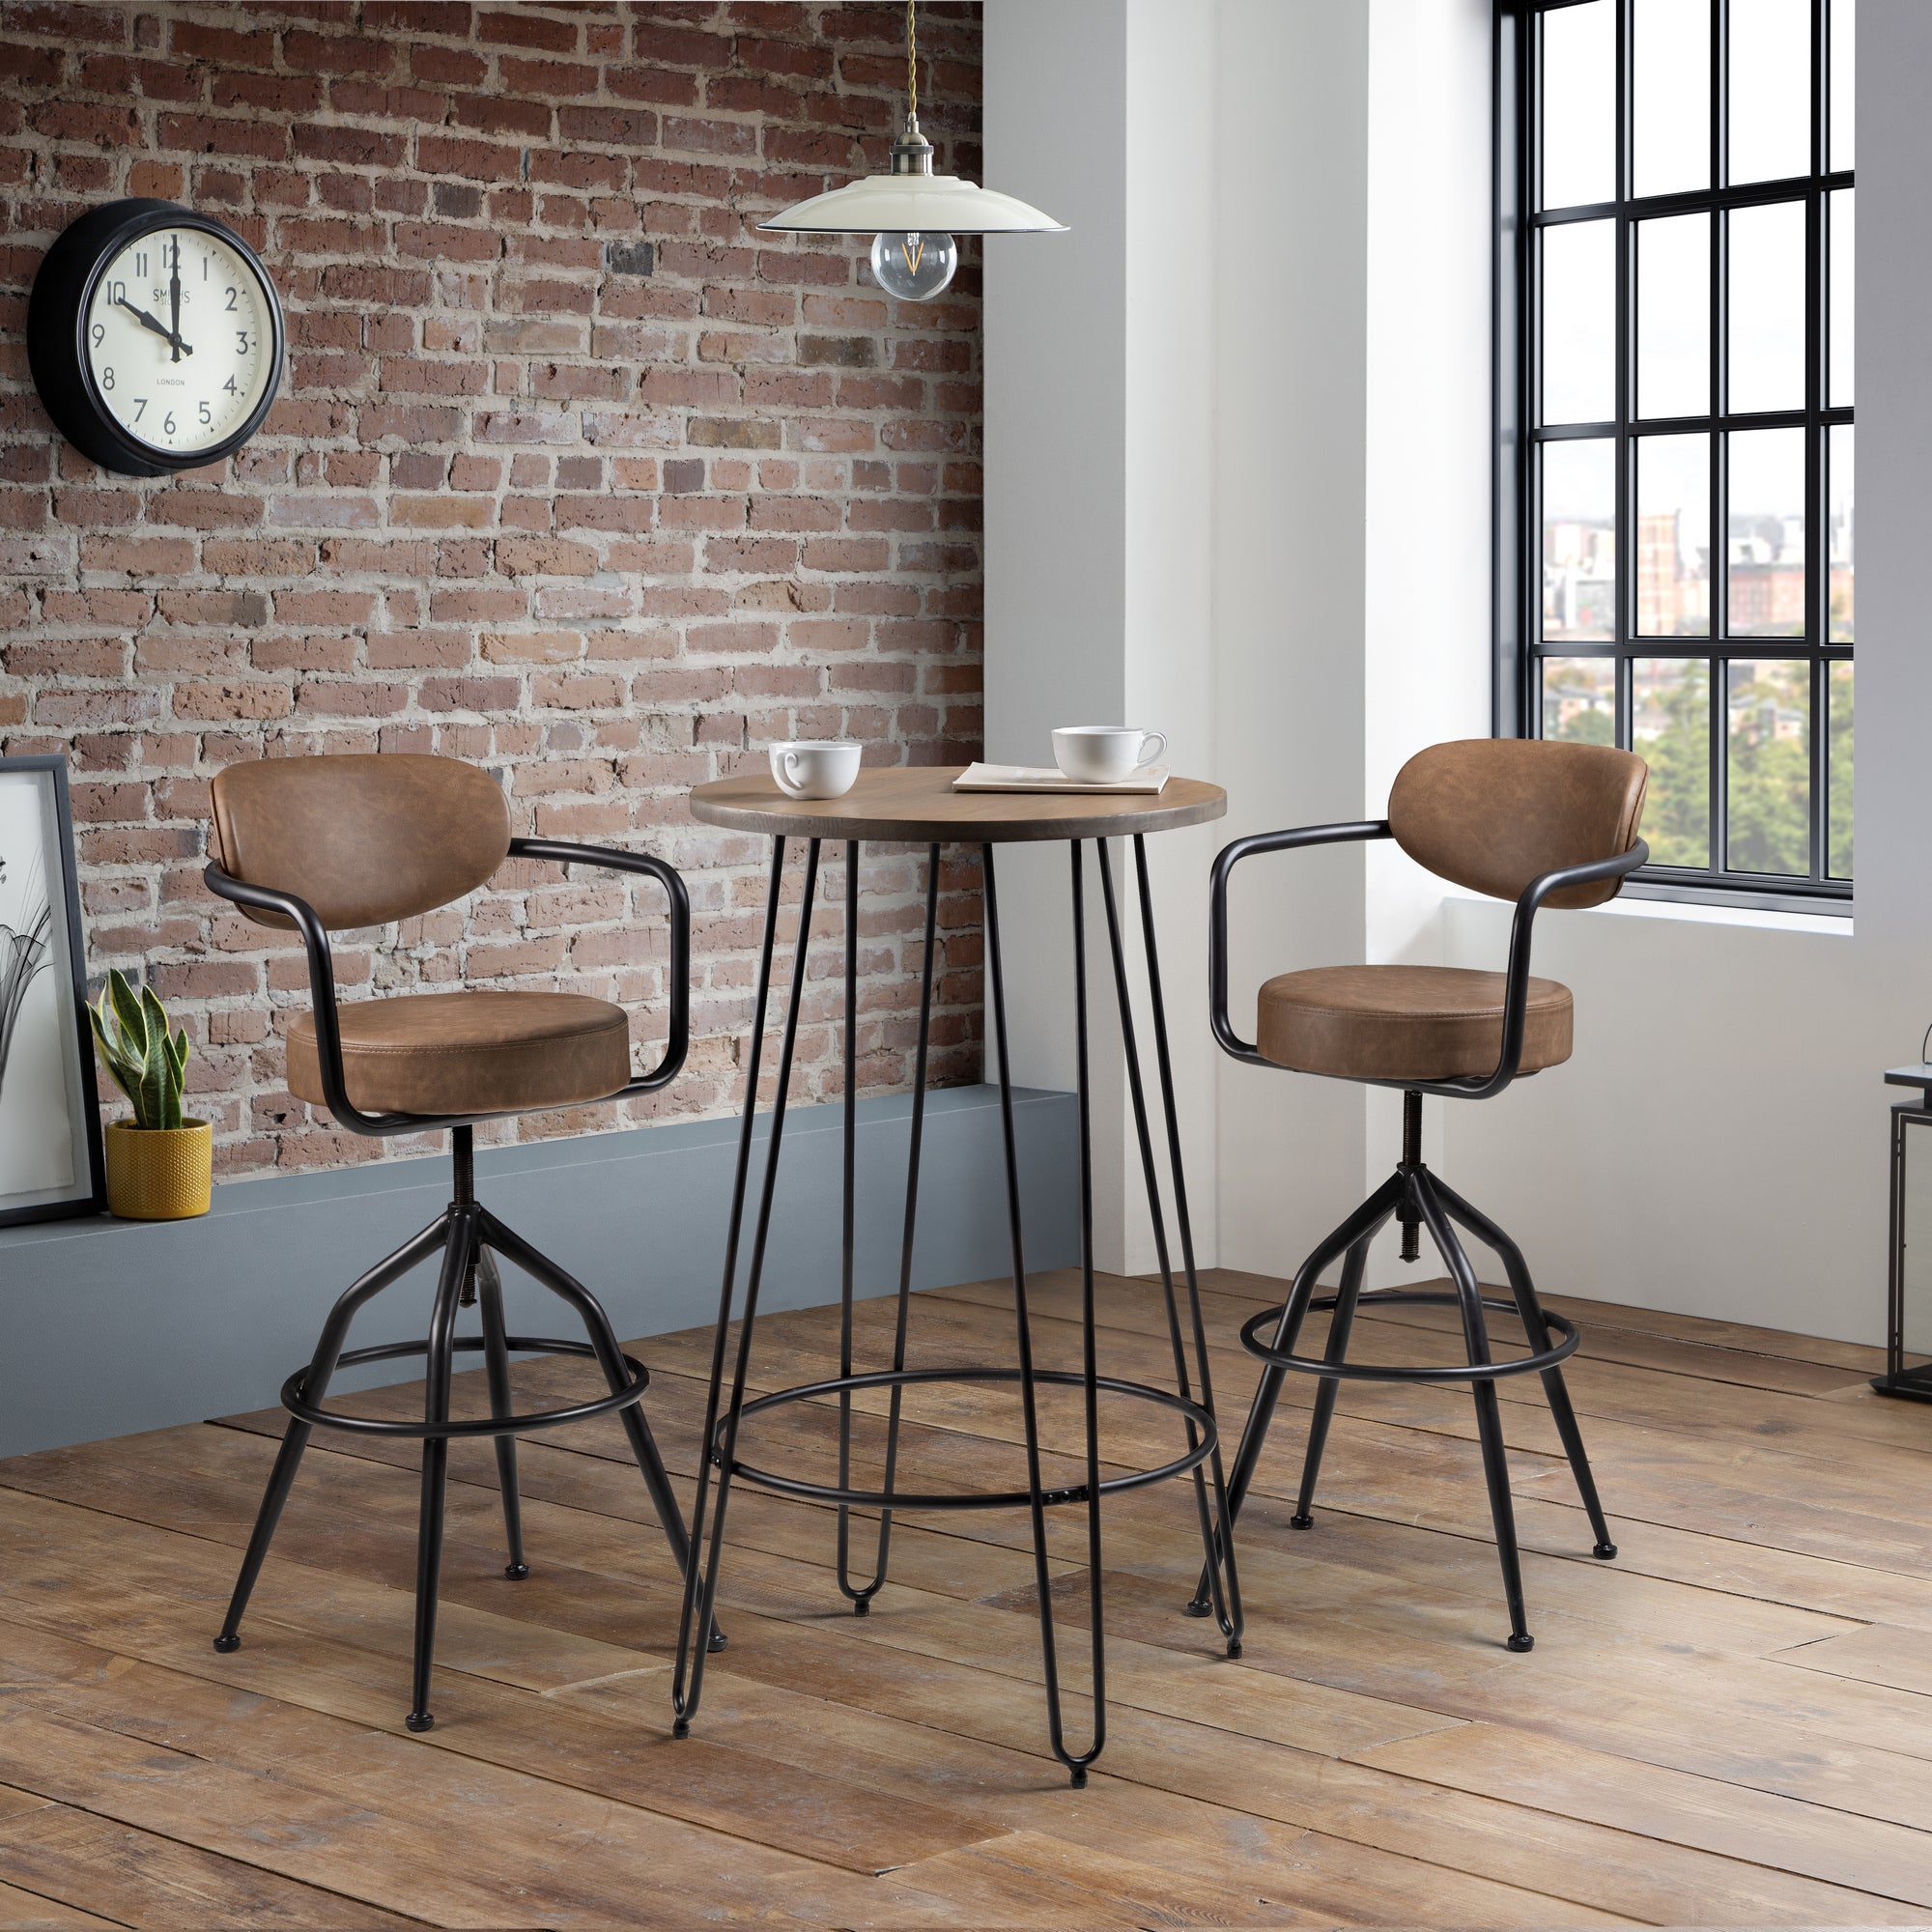 Dalston Round Bar Table With 2 Barbican Stools Brown Mocha